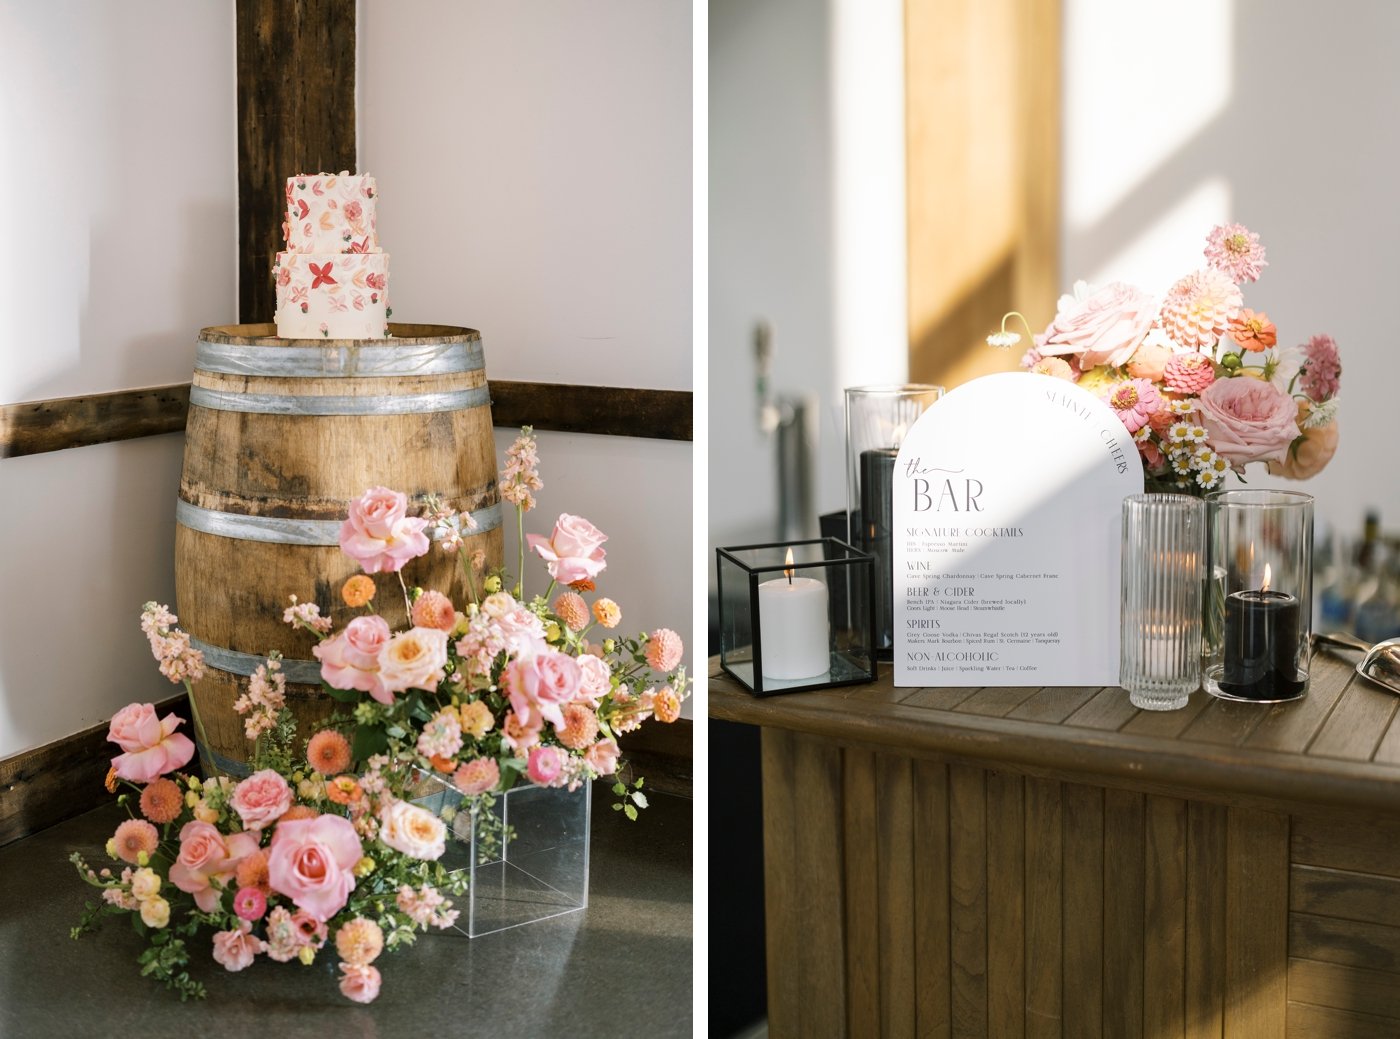 Wedding cake on a wine barrel behind an arrangement of organic pink and coral flowers